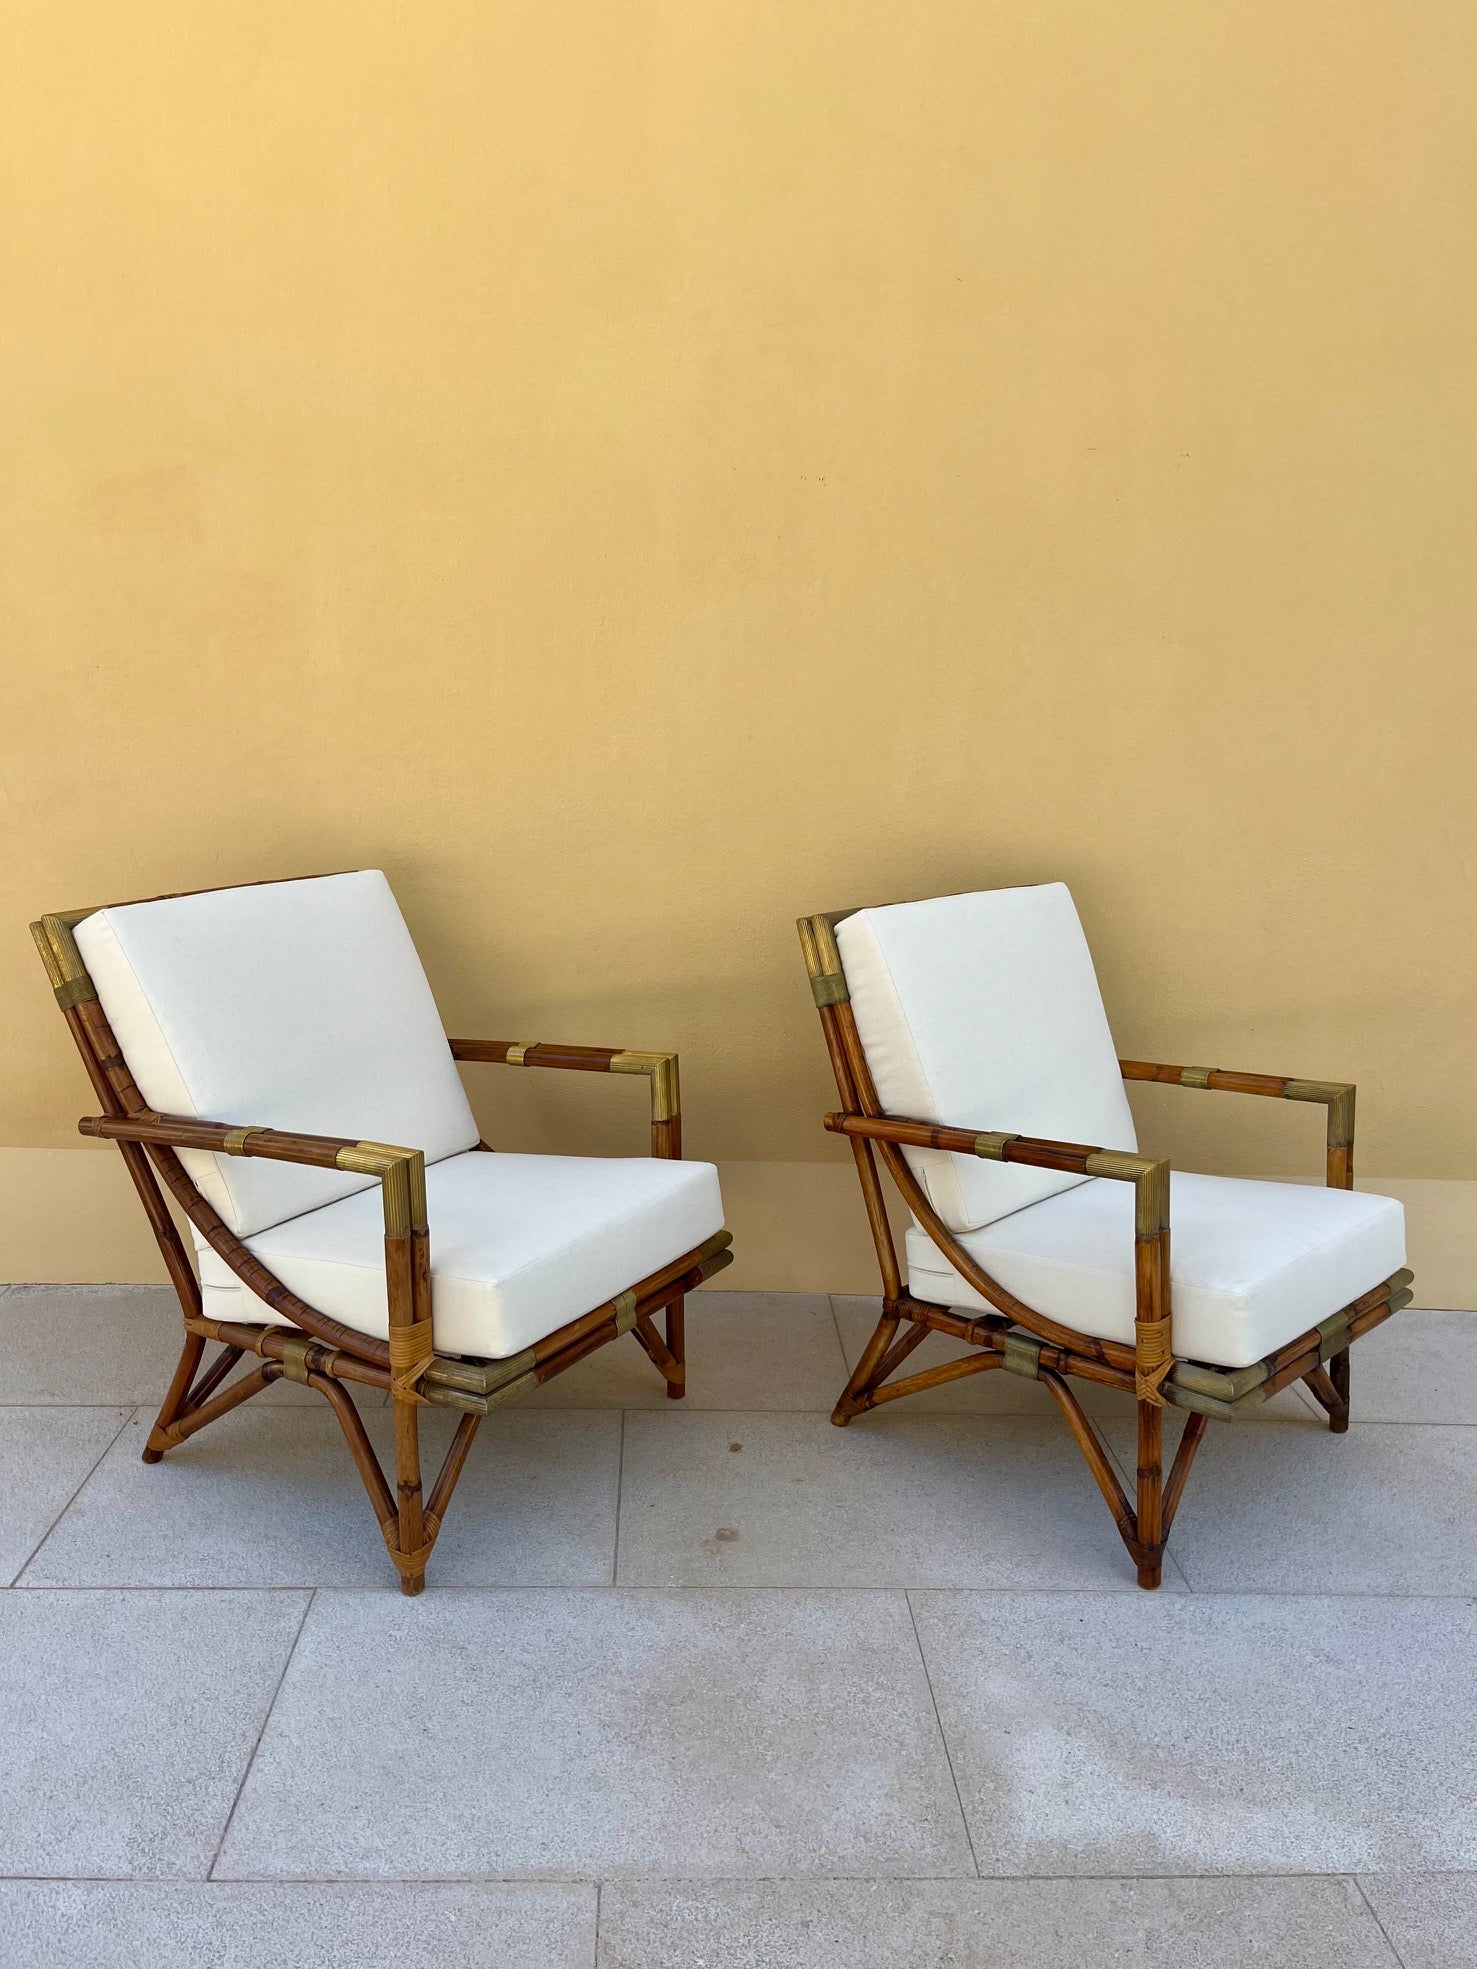 Pair of lounge chairs set in 